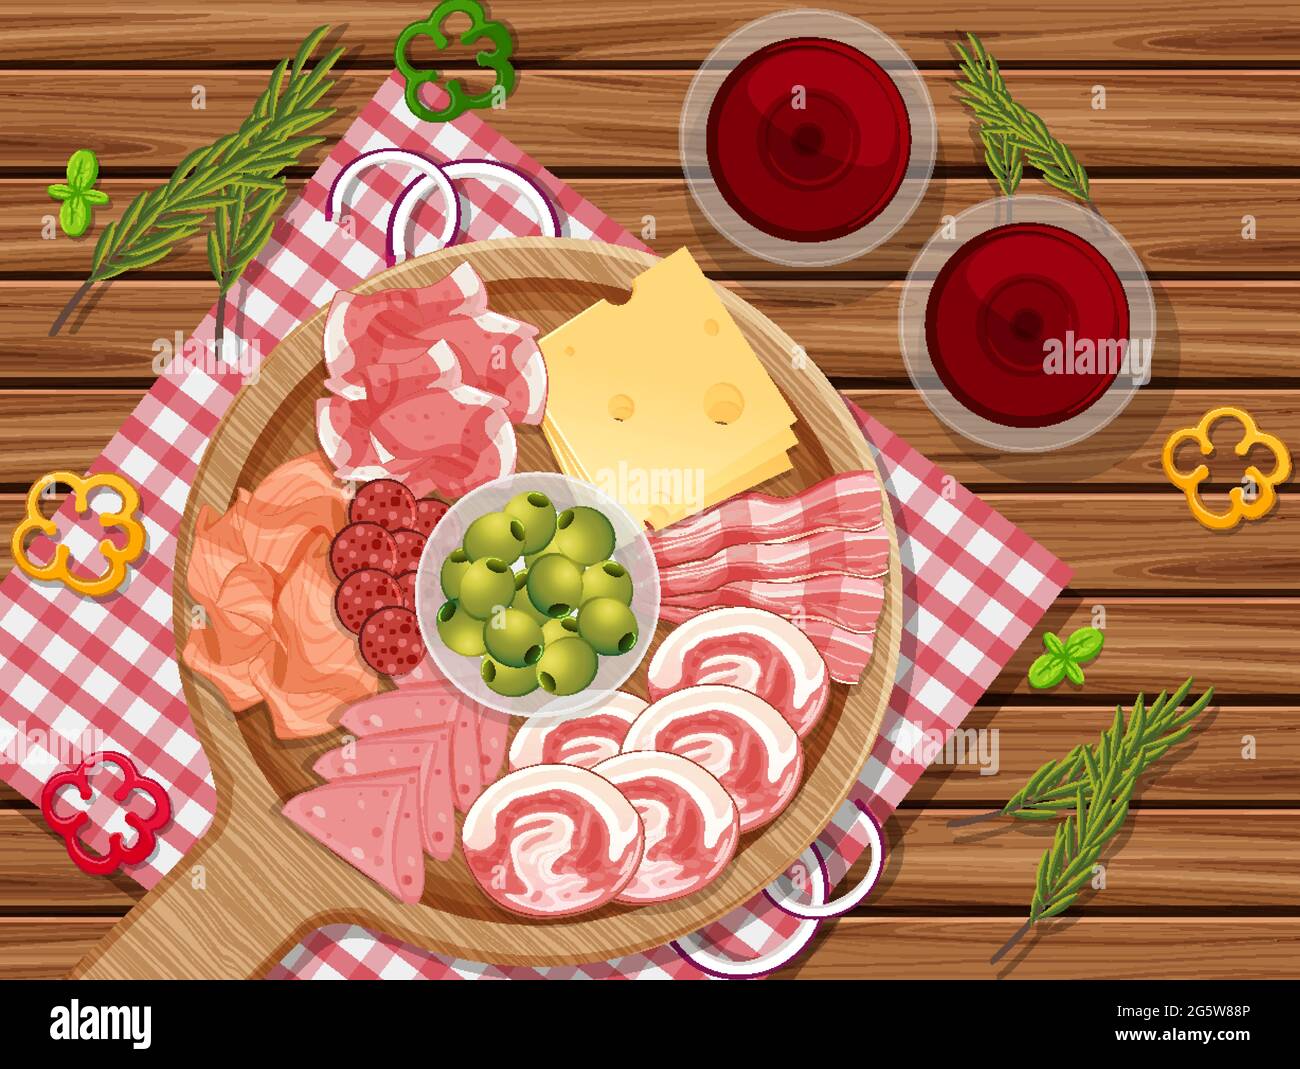 Platter of cold meats and smoked meat on the table background illustration Stock Vector